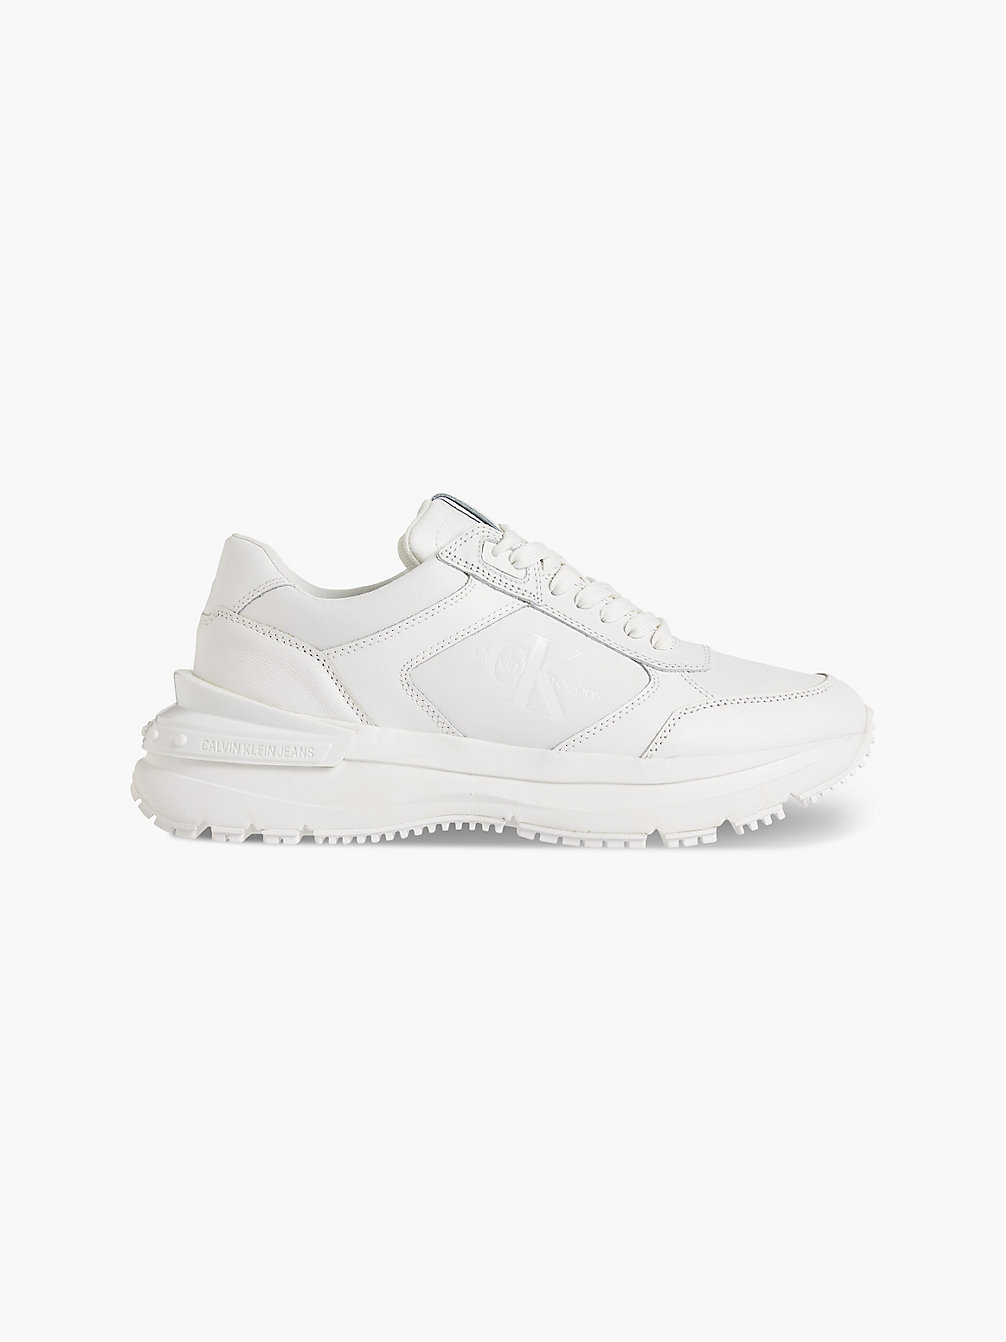 TRIPLE WHITE Leather Chunky Trainers undefined men Calvin Klein